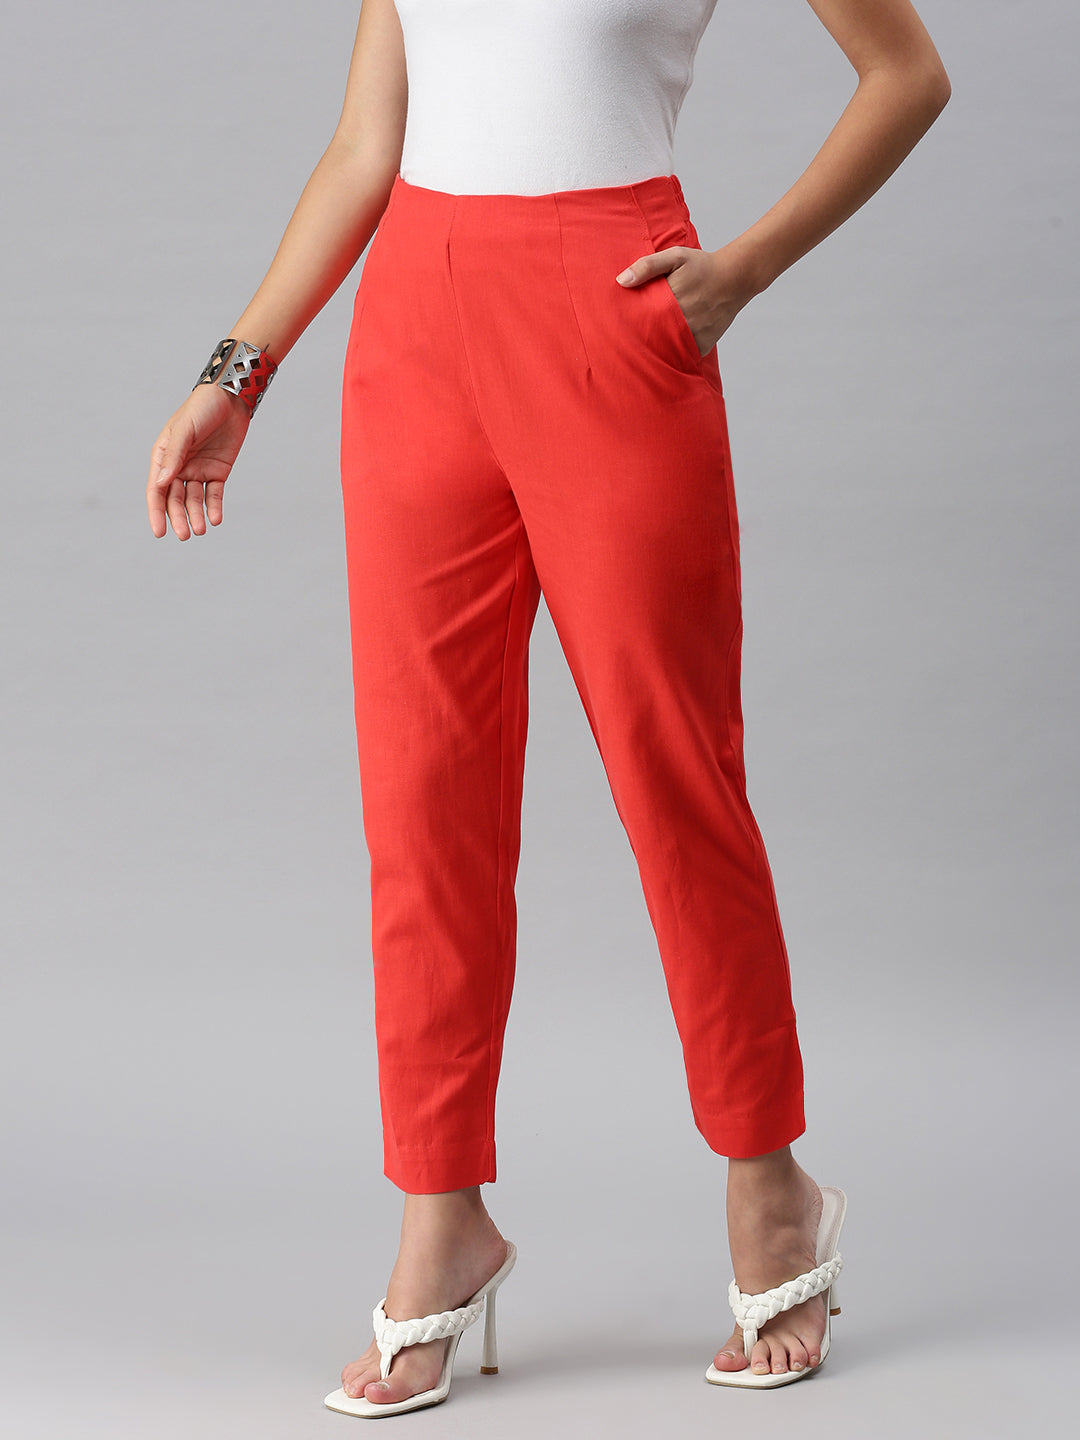 PATRORNA Red Mid Rise Slim Fit Cigarette Trousers